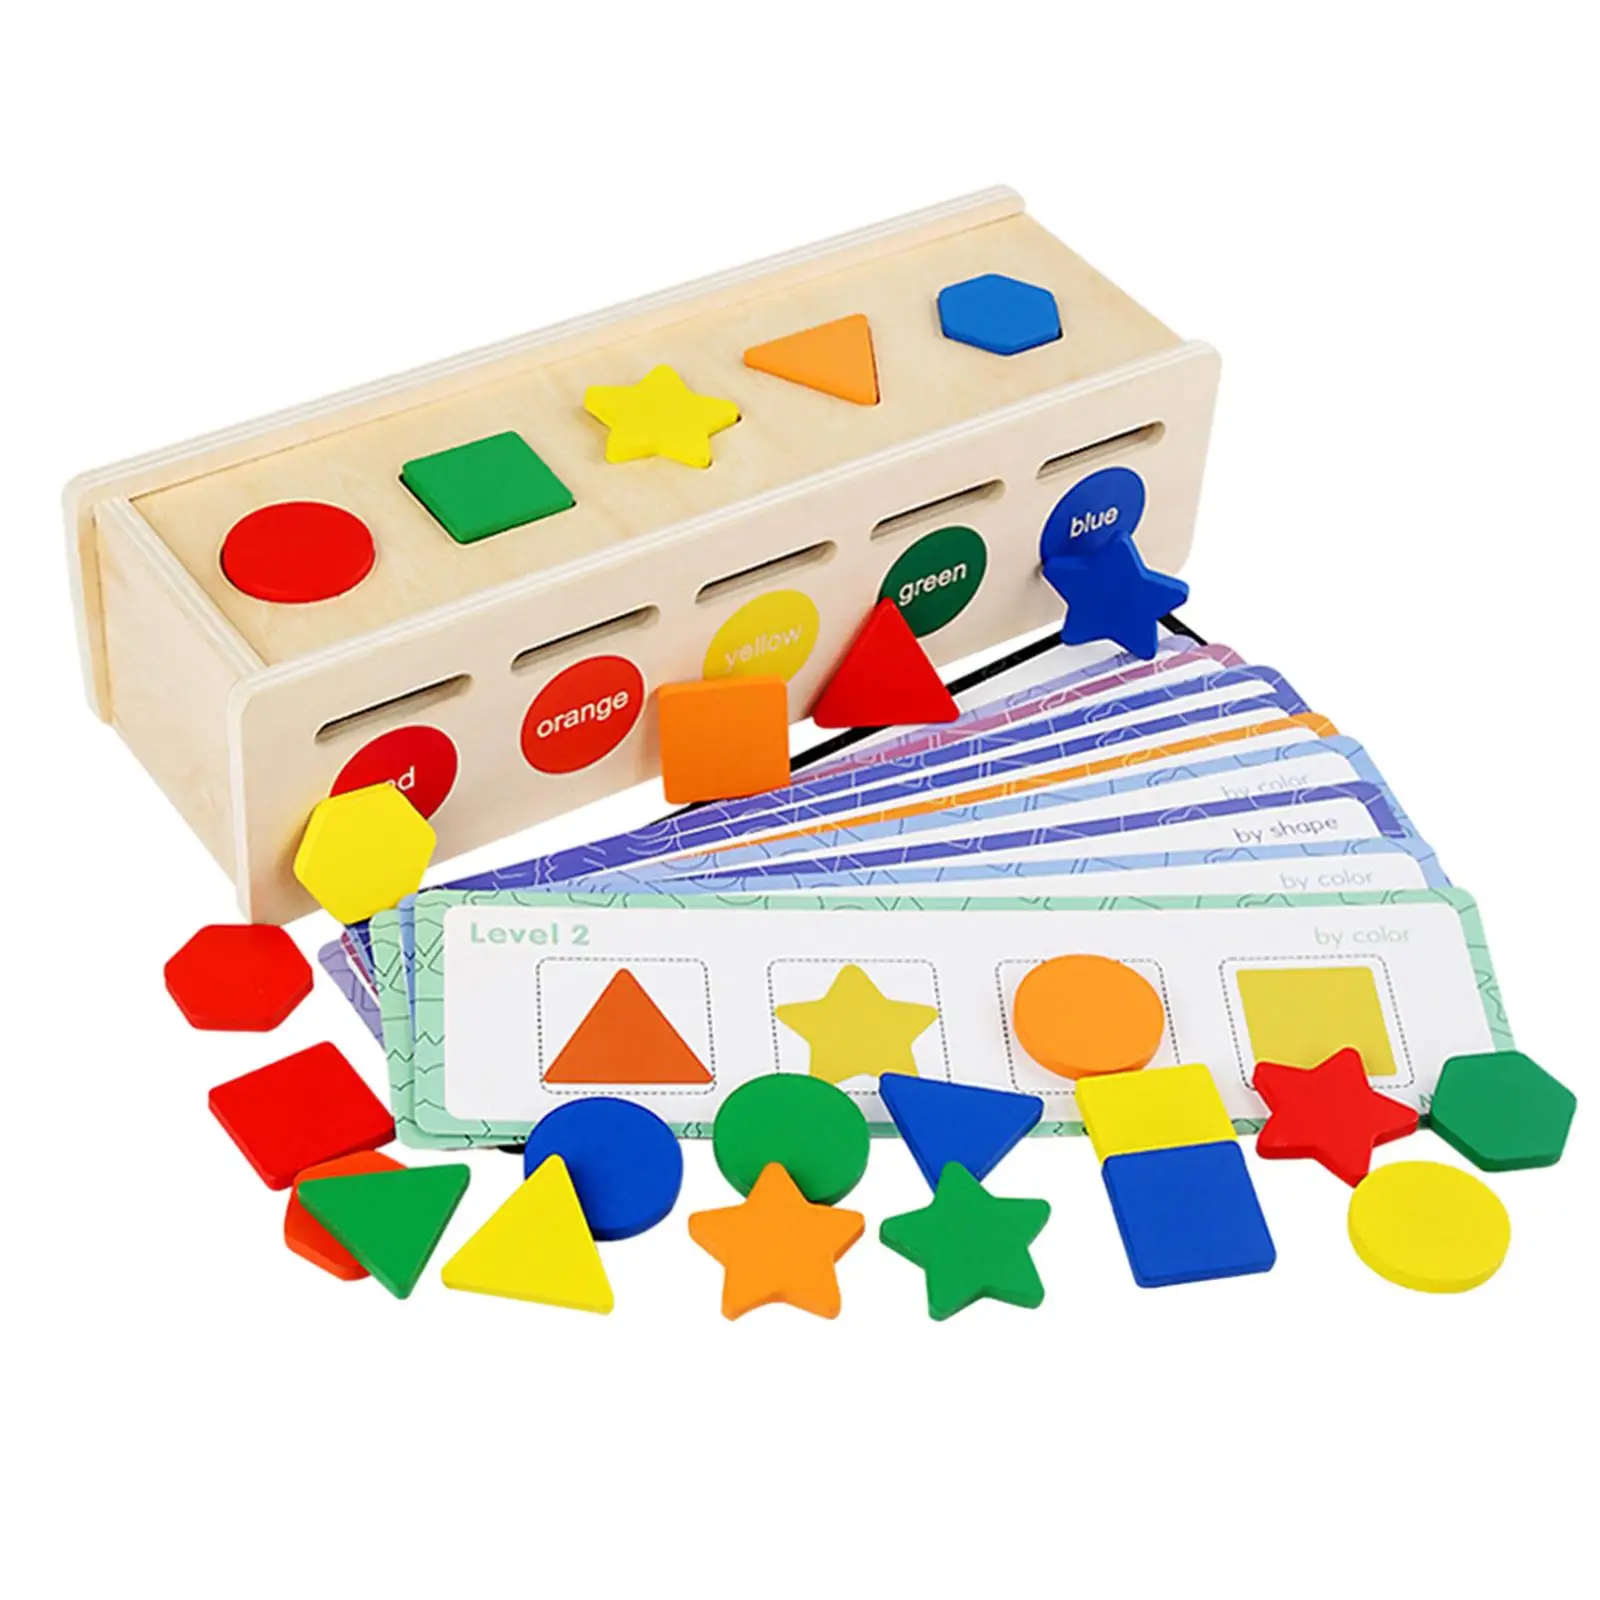 Montessori Toys Color & Shape Sorting Toy Block Puzzles Matching Box, 25 Geometric Blocks and 12 Cards for Children Kids